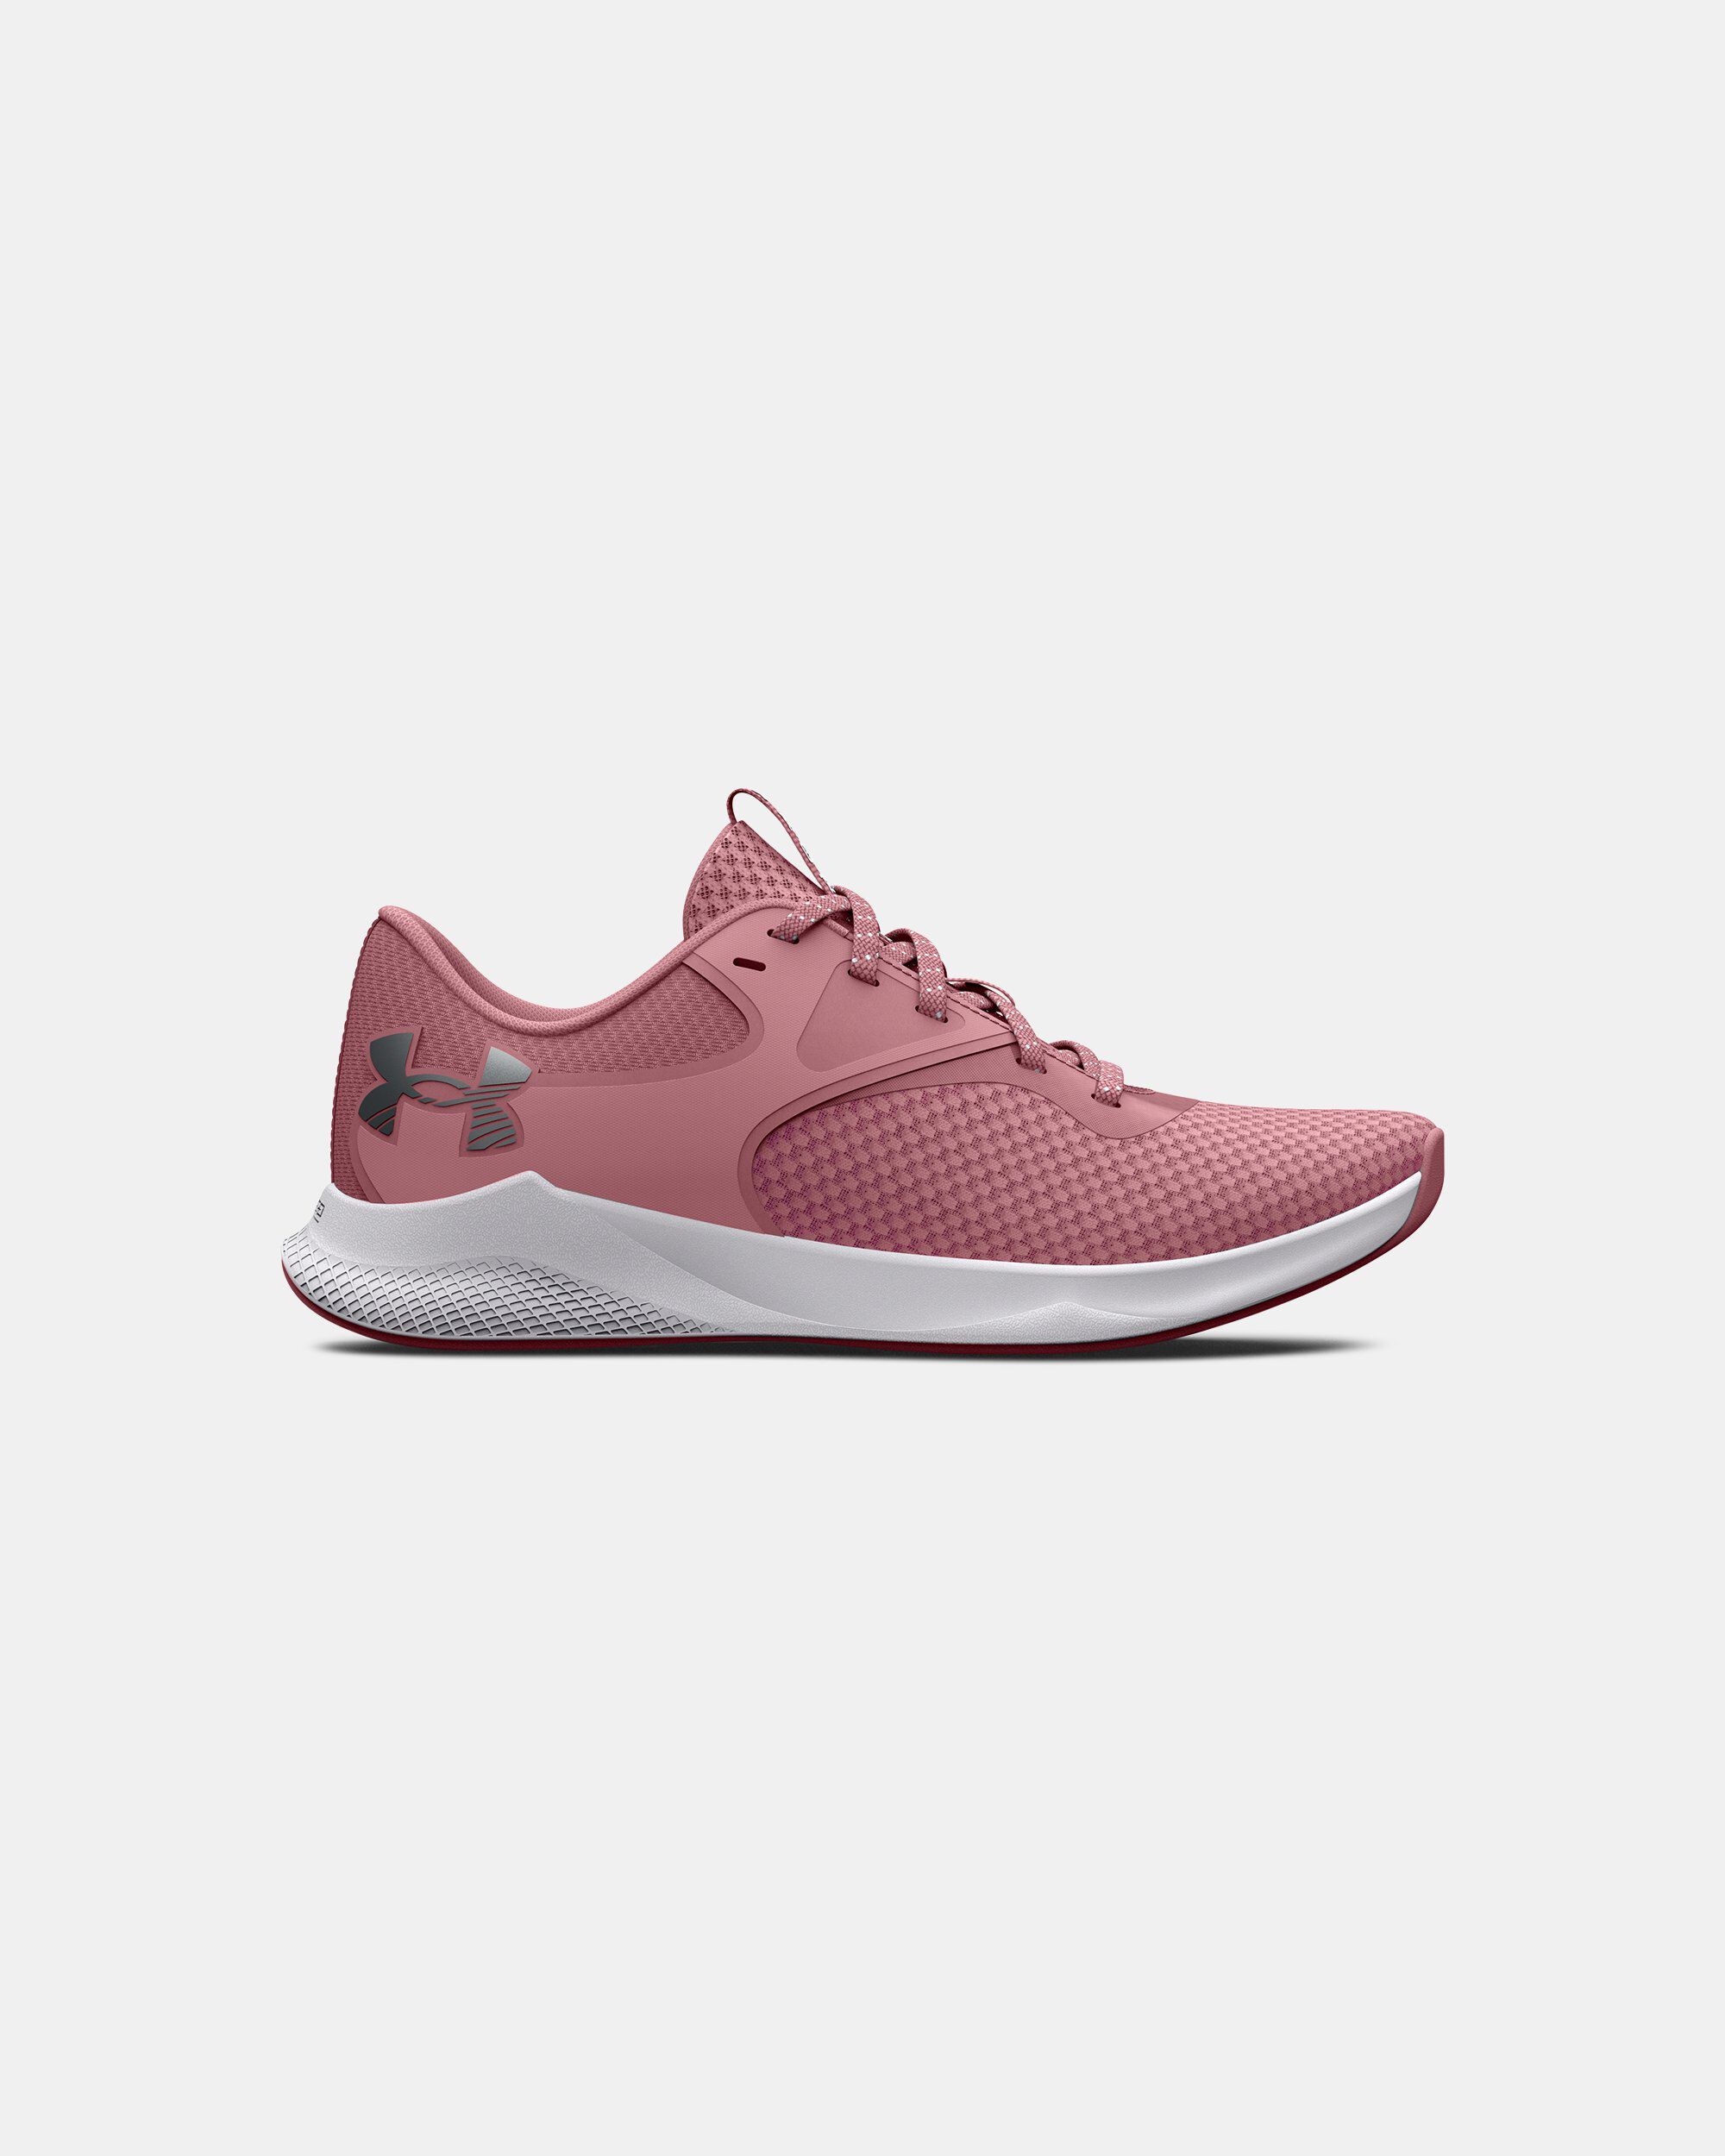 Under Armour Women's UA Charged Breeze 2 Running Shoes Astro Pink